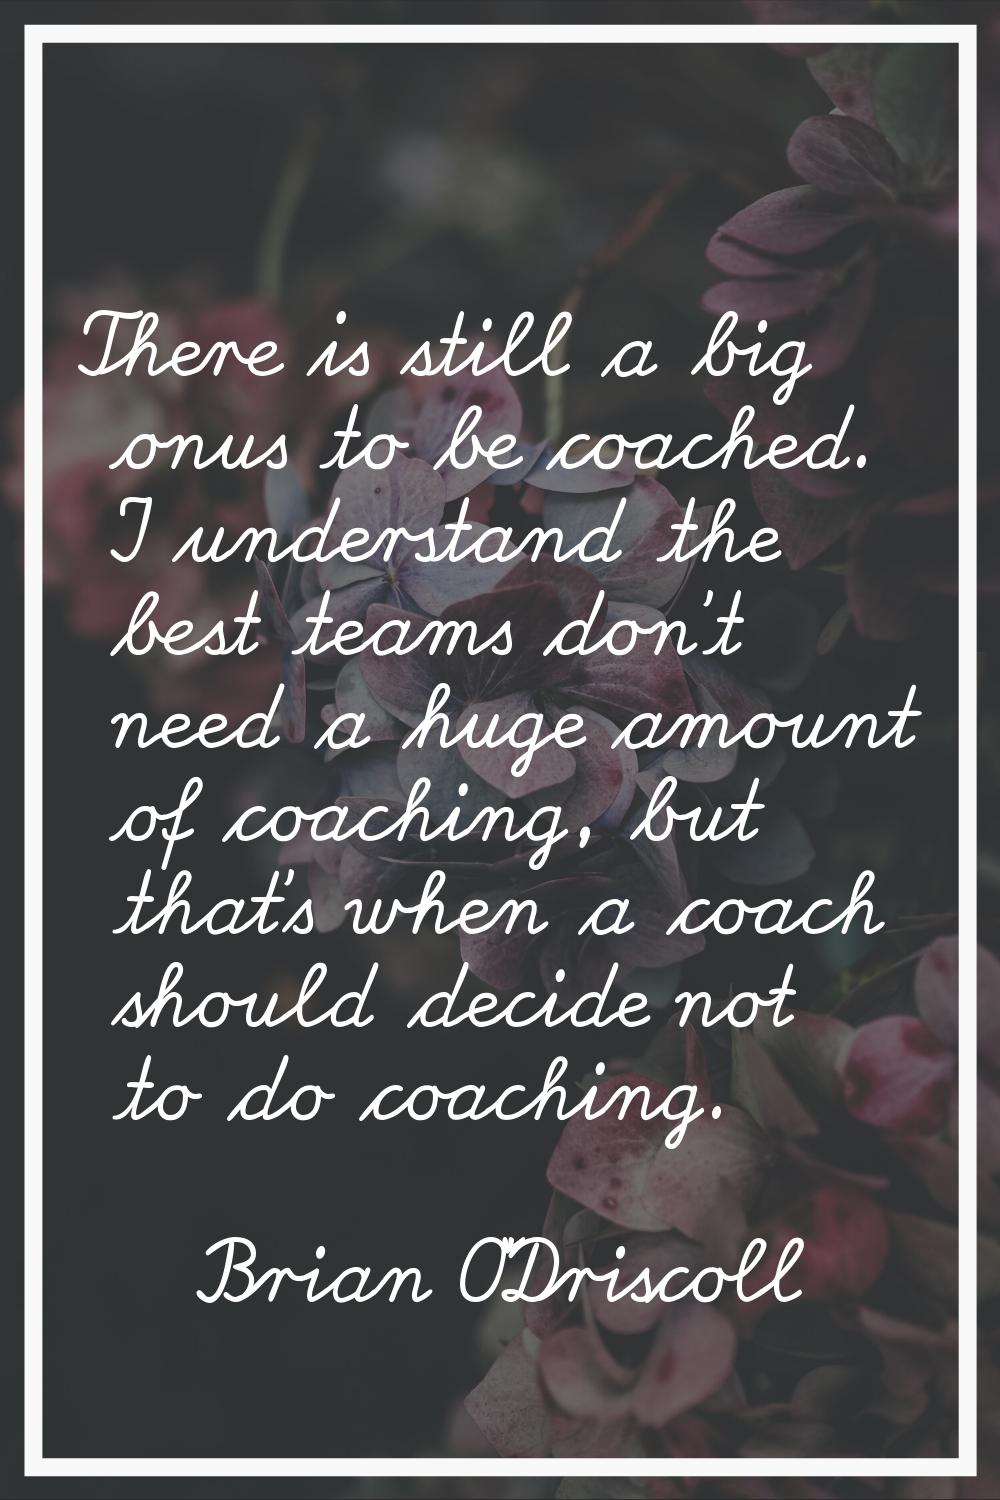 There is still a big onus to be coached. I understand the best teams don't need a huge amount of co